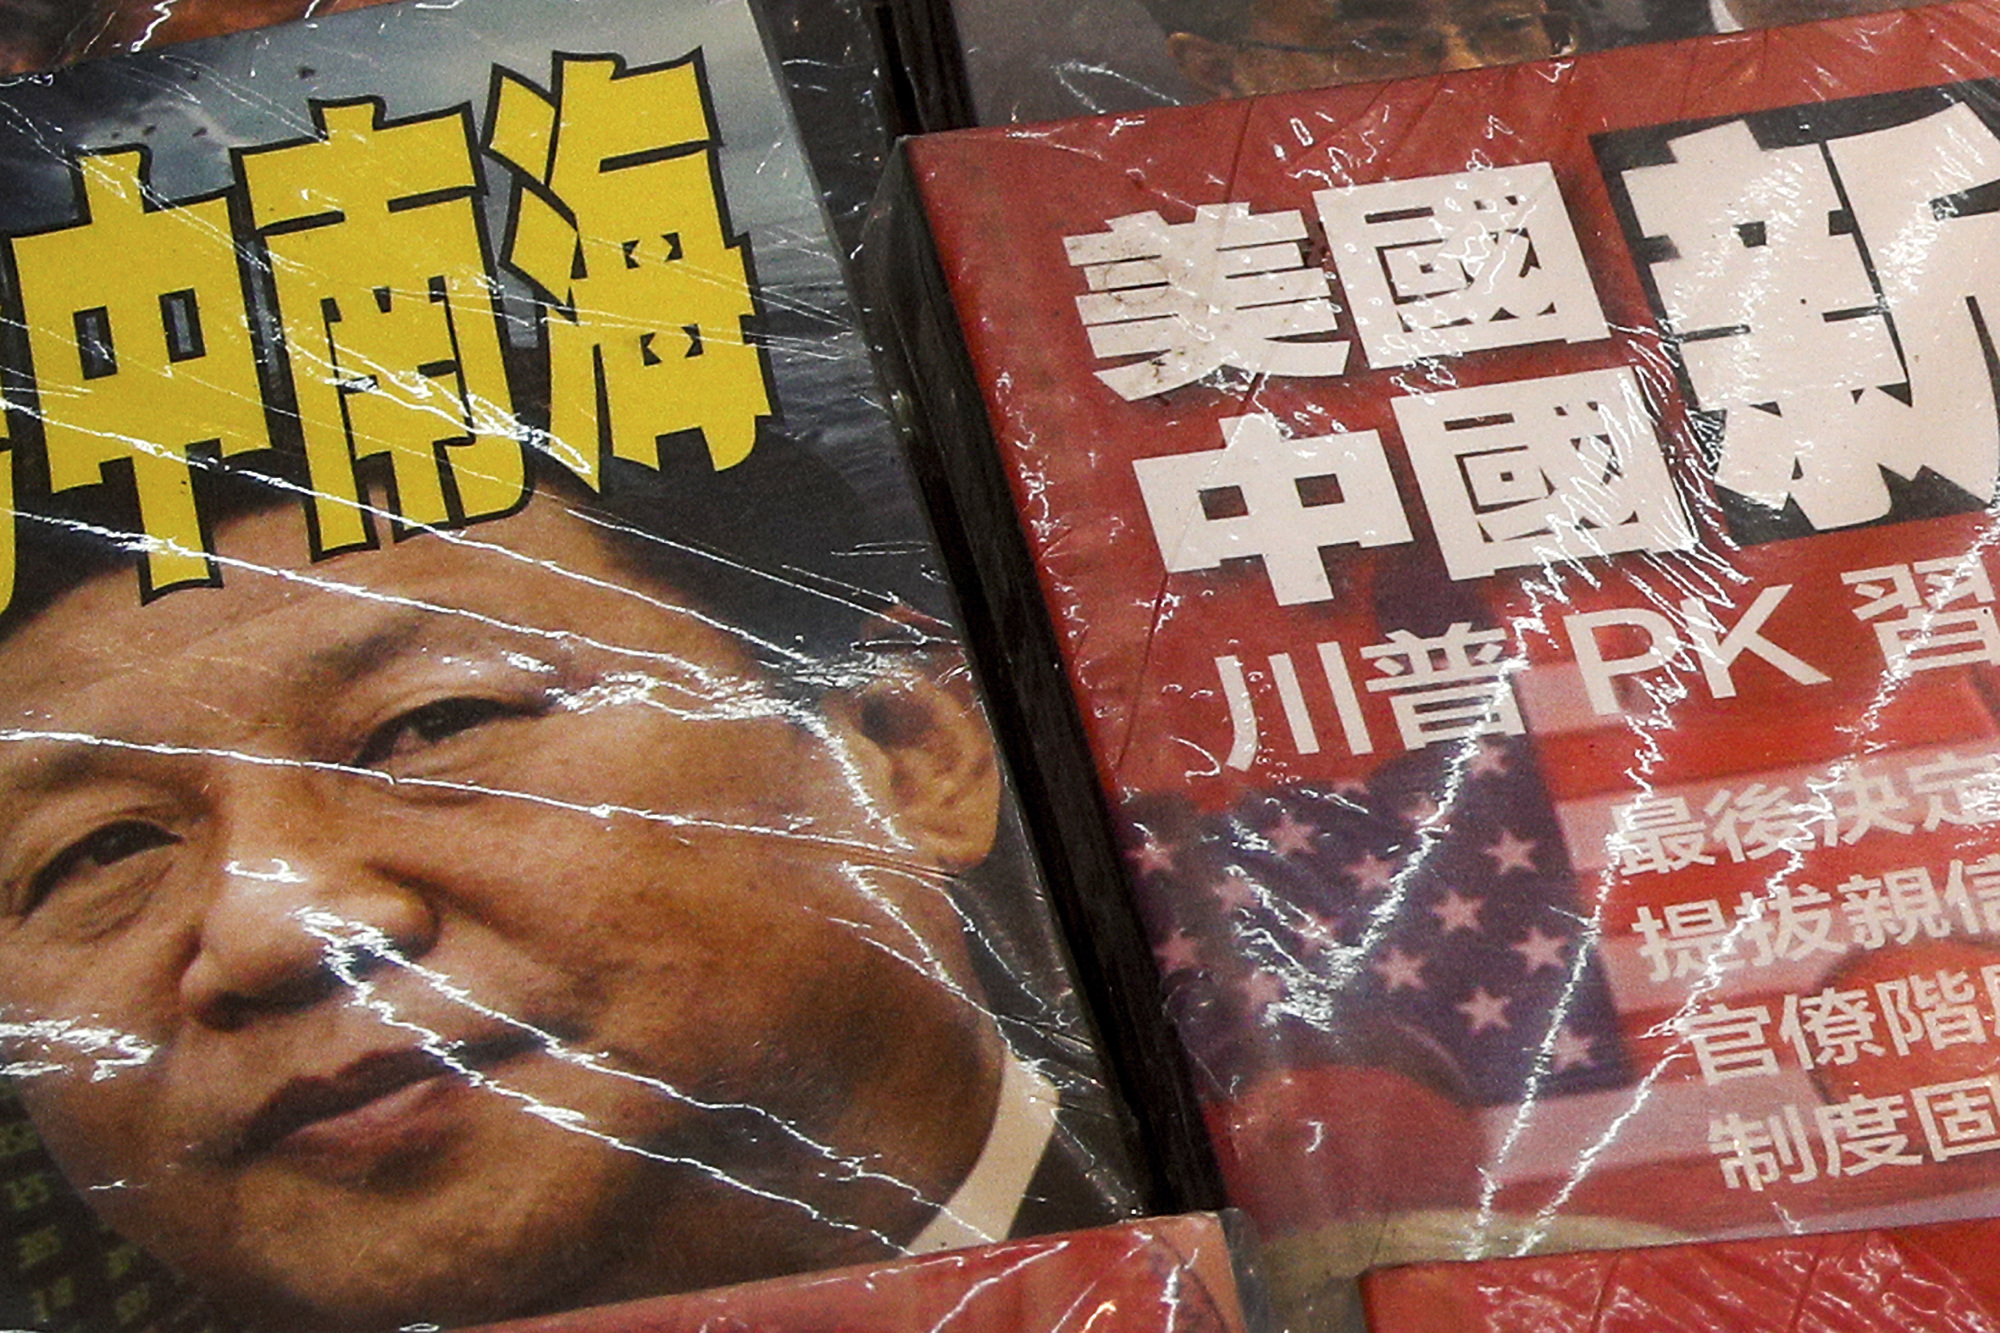 Magazines with front covers featuring Chinese President Xi Jinping and the words 'South China Sea' and 'Xi against U.S. President Donald Trump' are sold at a roadside bookstand in Hong Kong on July 4. | AP